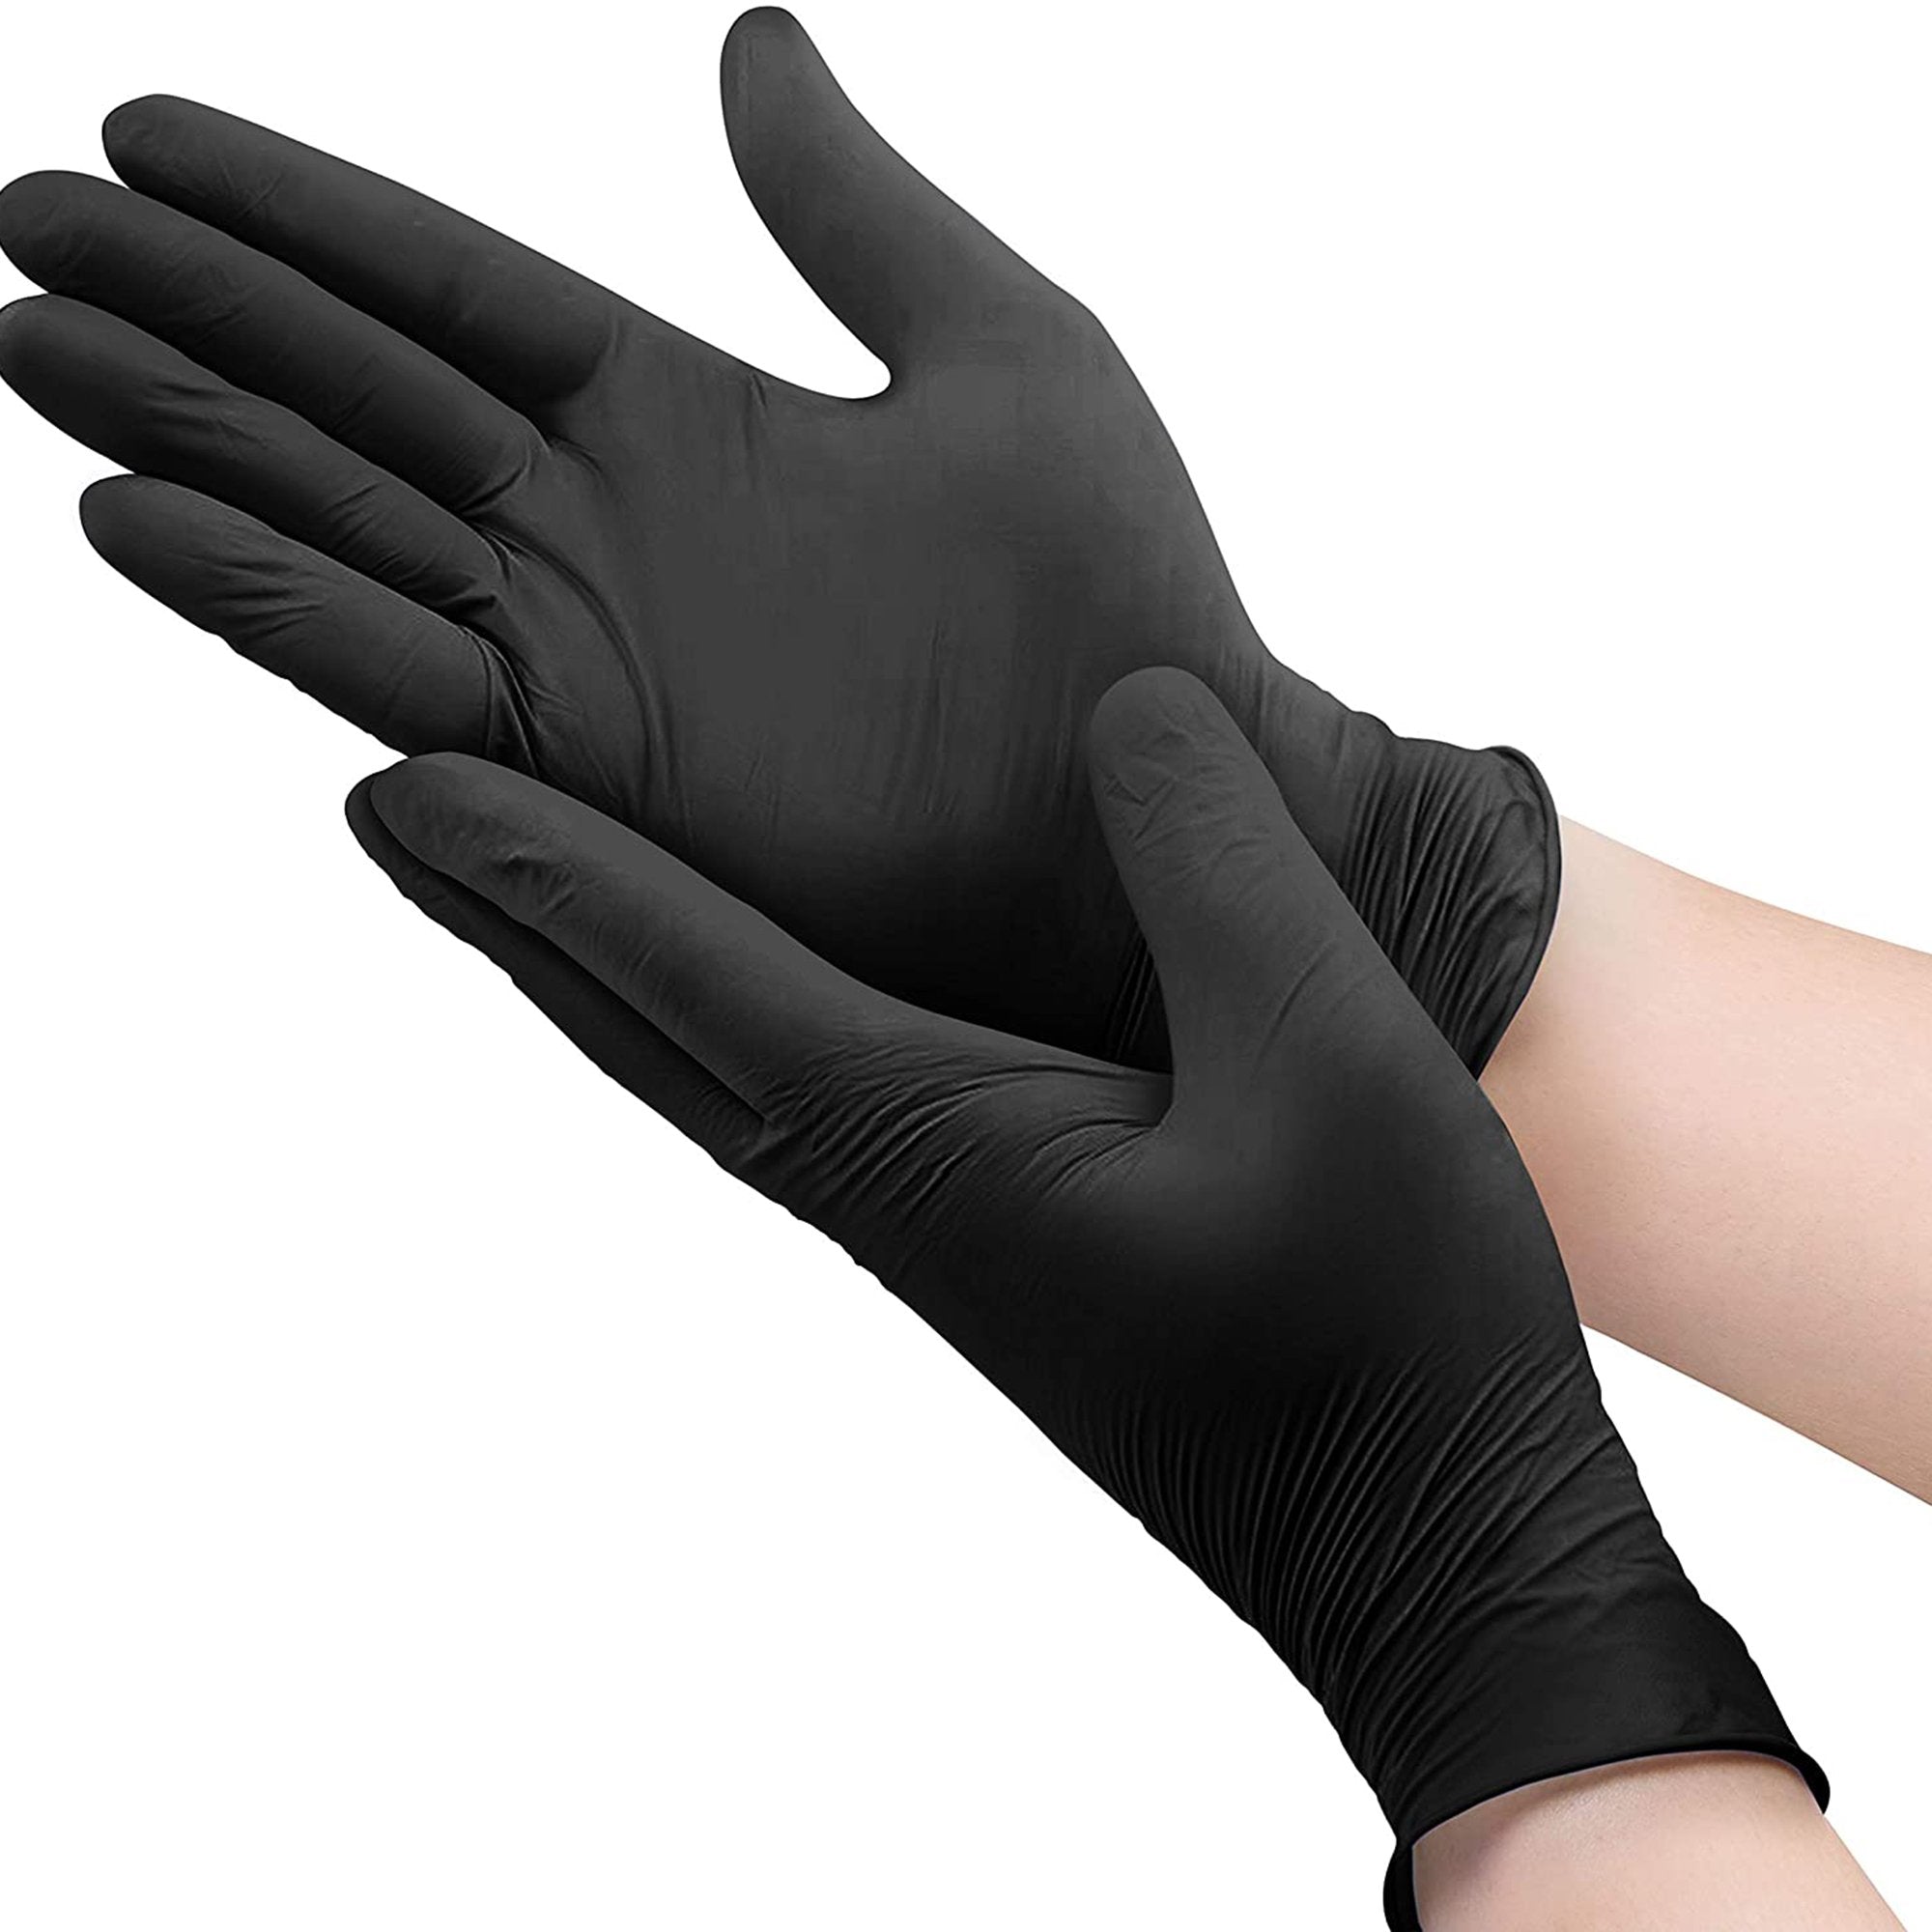 Exam Glove MICROFLEX MidKnight Touch 93-734 Medium NonSterile Nitrile Standard Cuff Length Textured Fingertips Black Not Rated